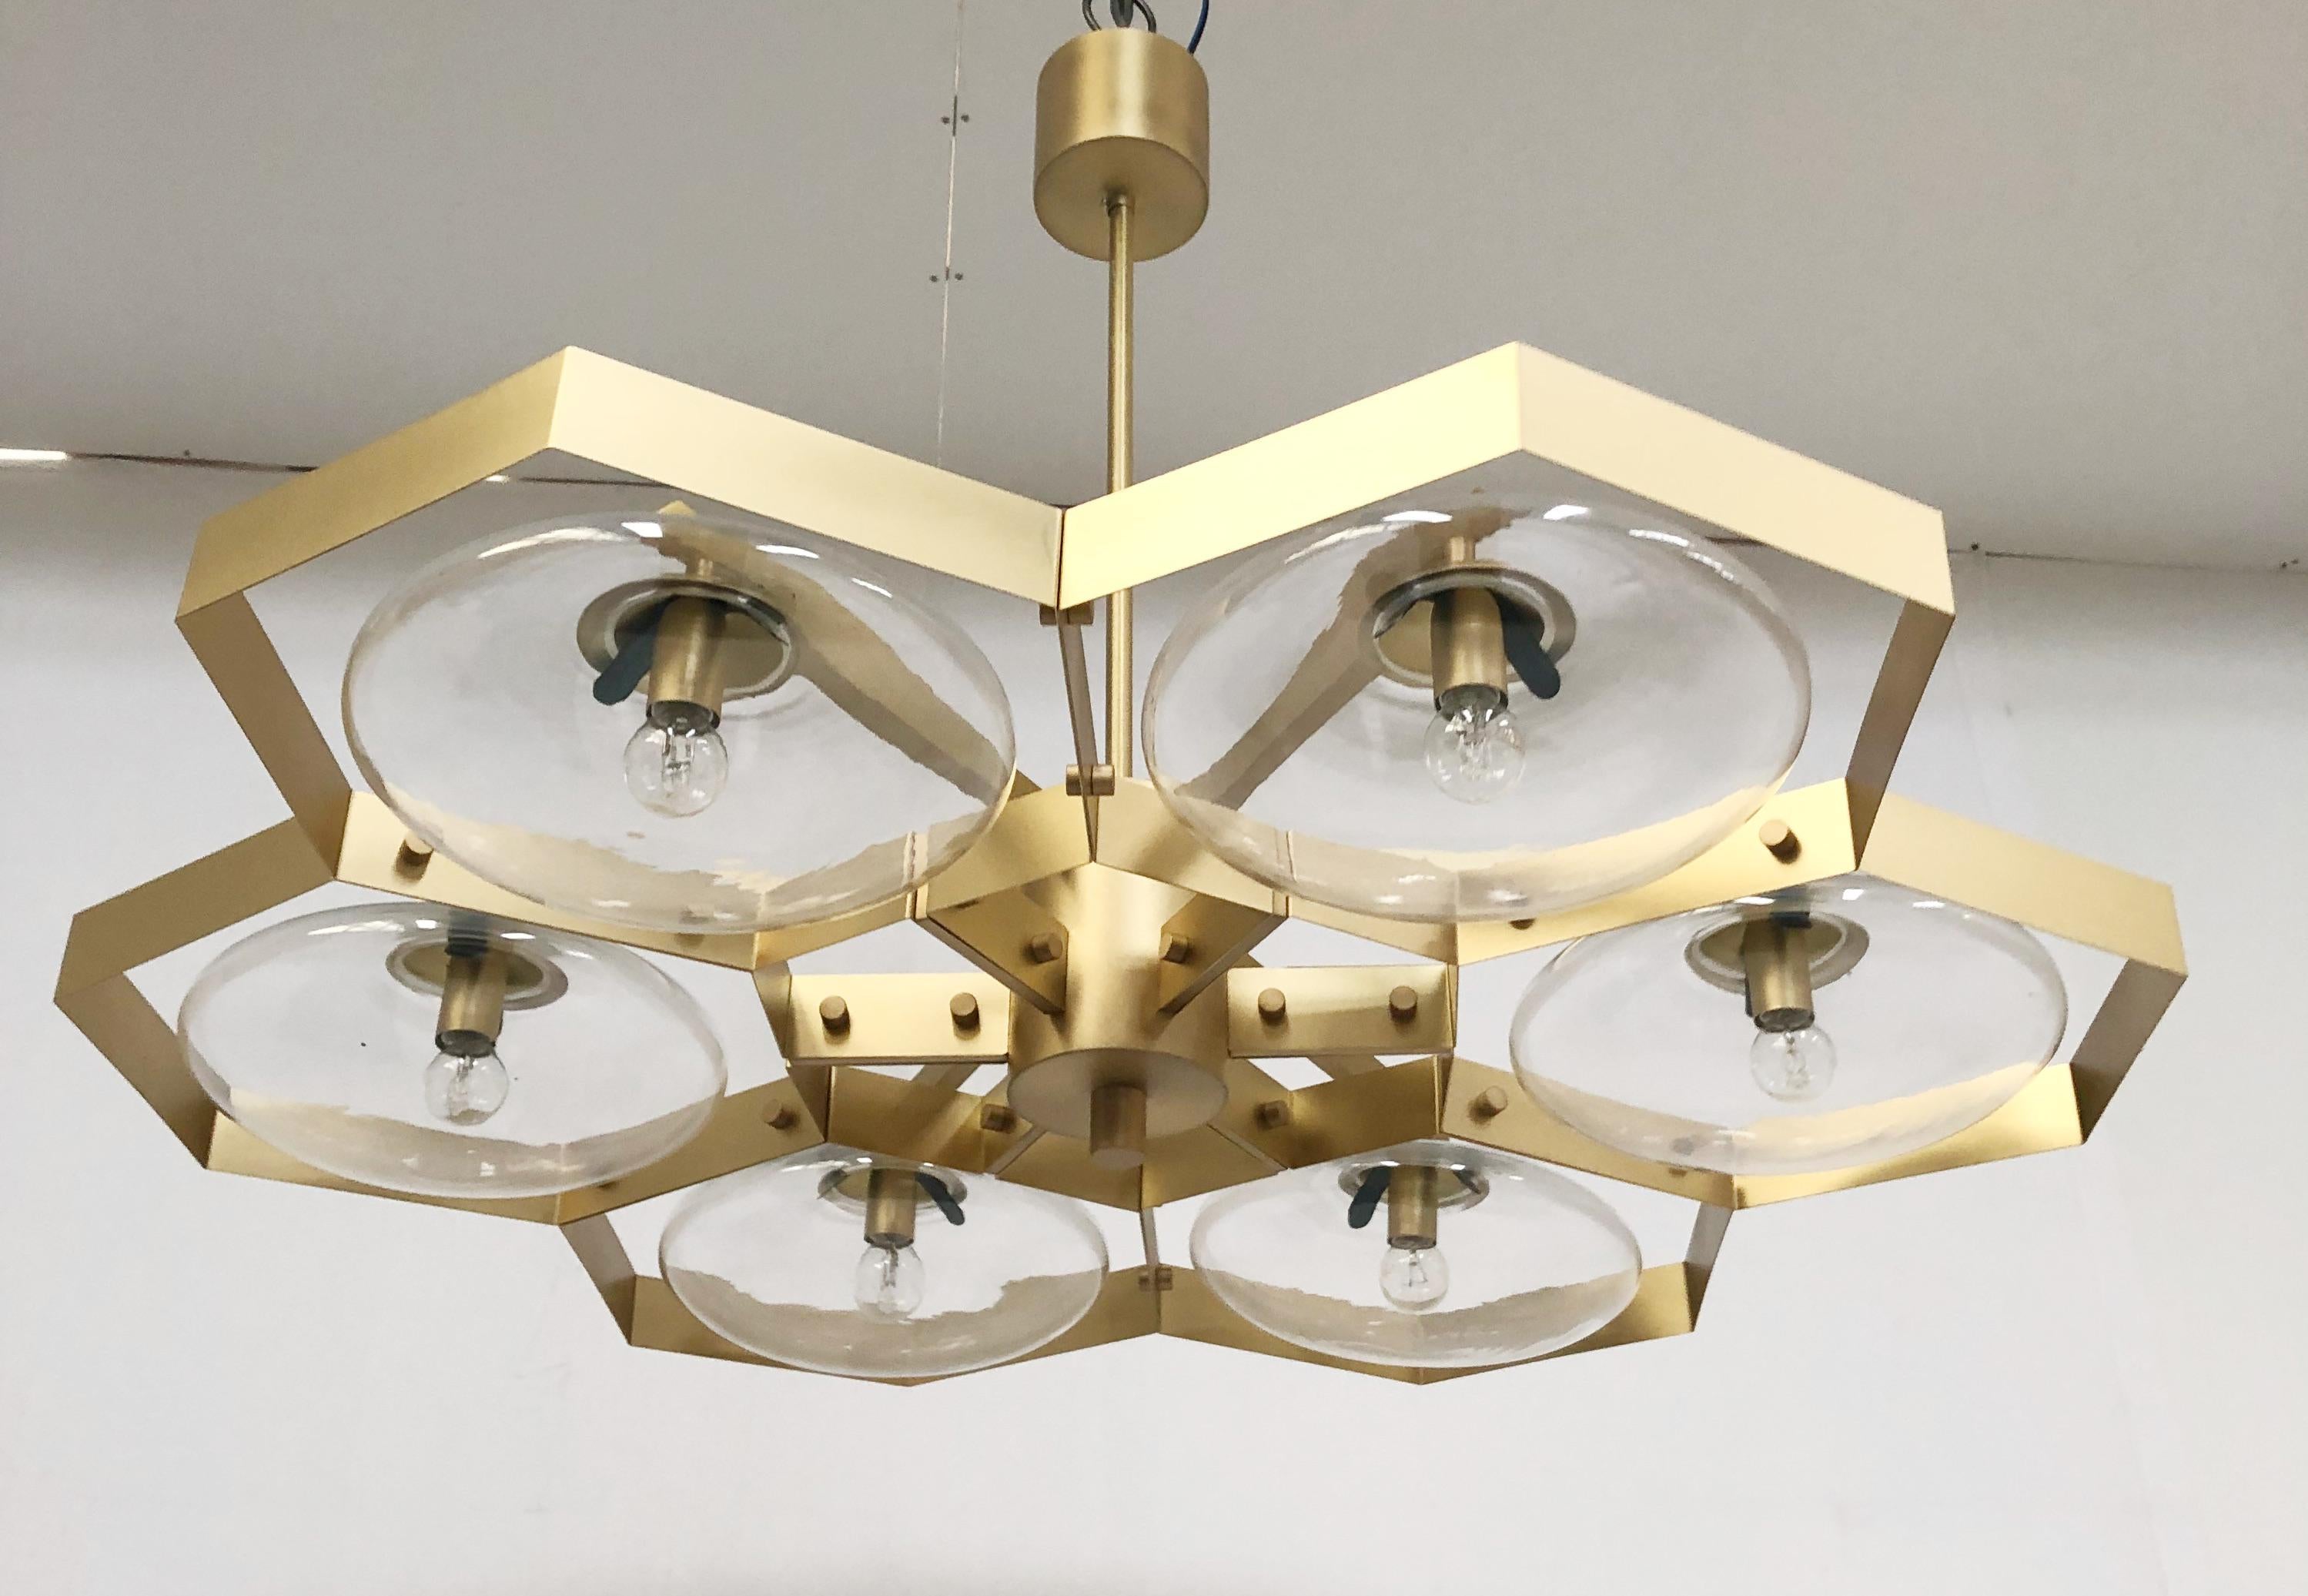 Italian chandelier with Murano glass shades mounted on solid brass frame / Made in Italy
Designed by Fabio Ltd, inspired by Angelo Lelli and Arredoluce styles
6 lights / E12 or E14 / max 40W each
Measures: Diameter 43 inches, height 30 inches
Order